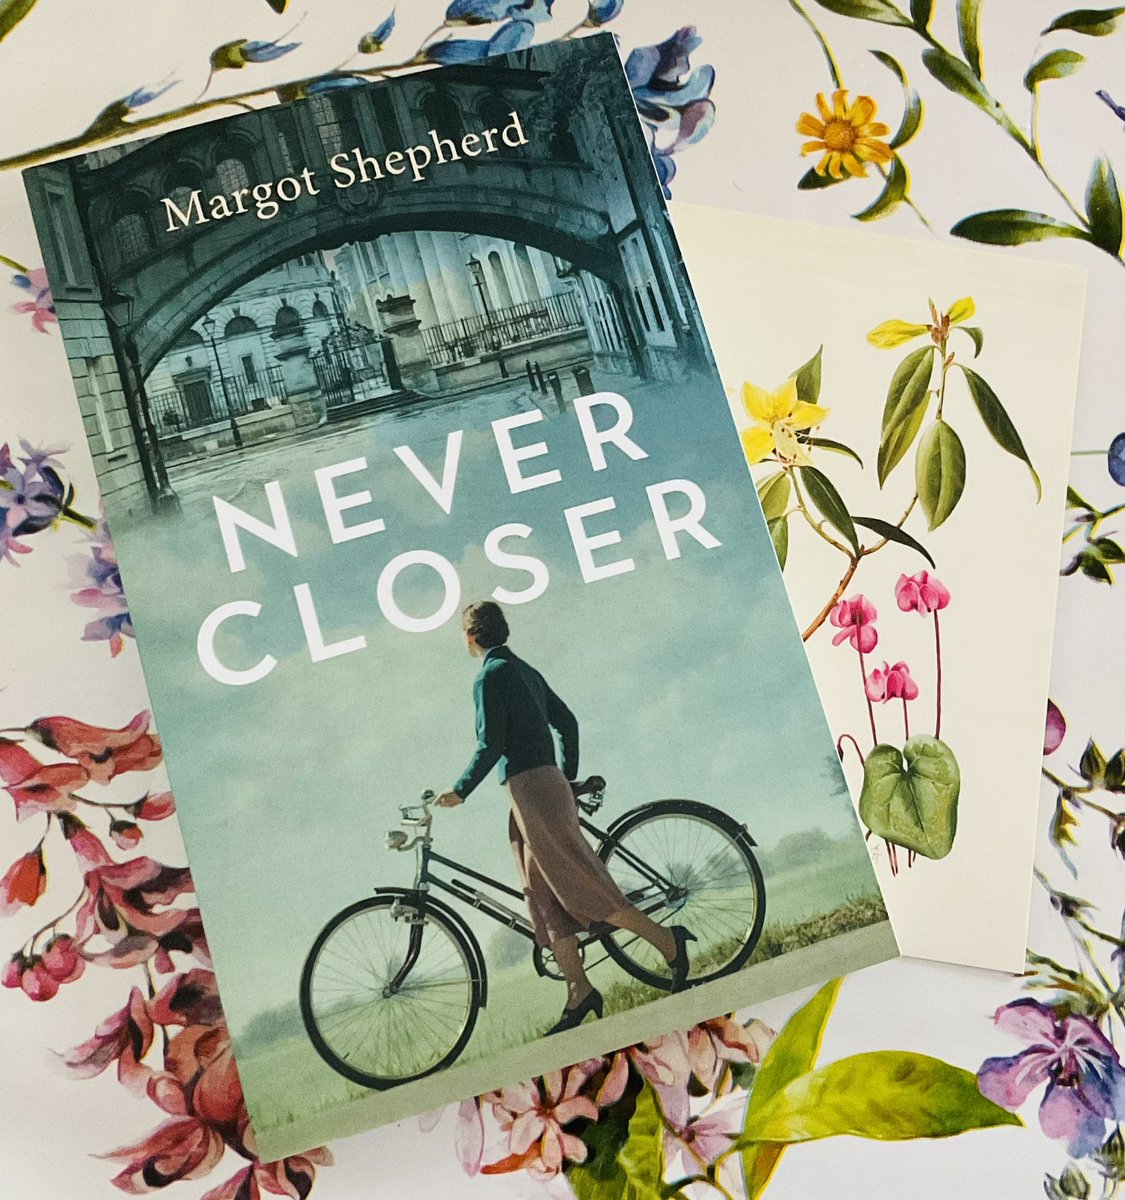 Huge thanks to @MargotShepherdW for sending me a copy of her novel #NeverCloser which sounds really fascinating, I’m #SoGrateful #BookMail #BookTwitter #BookBlogger #HistoricalFiction #Tuesday